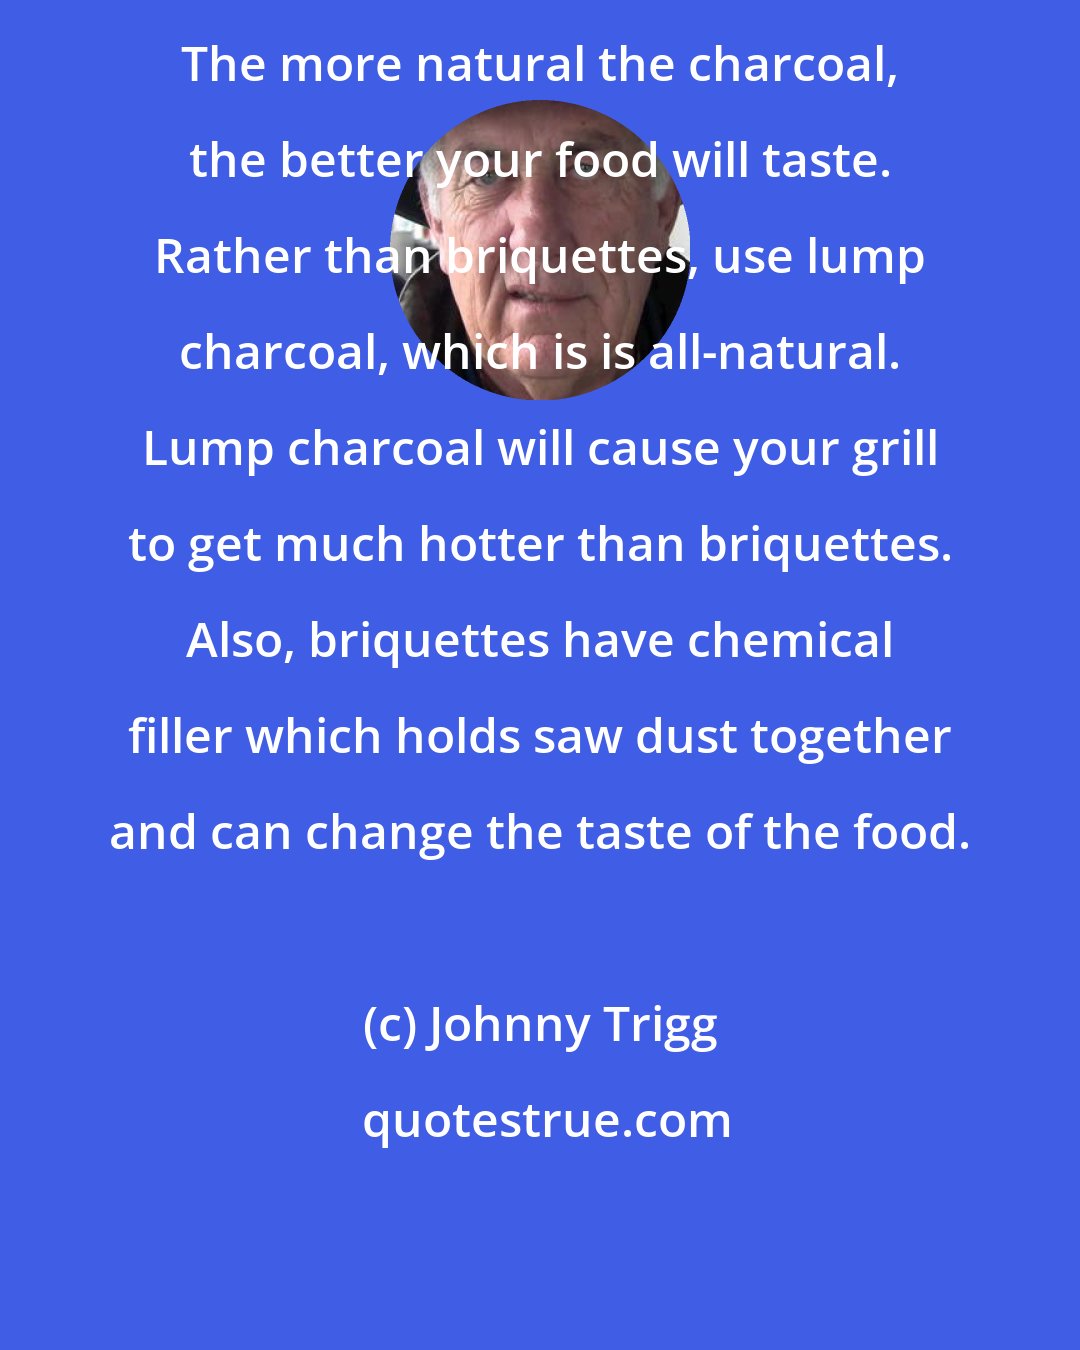 Johnny Trigg: The more natural the charcoal, the better your food will taste. Rather than briquettes, use lump charcoal, which is is all-natural. Lump charcoal will cause your grill to get much hotter than briquettes. Also, briquettes have chemical filler which holds saw dust together and can change the taste of the food.